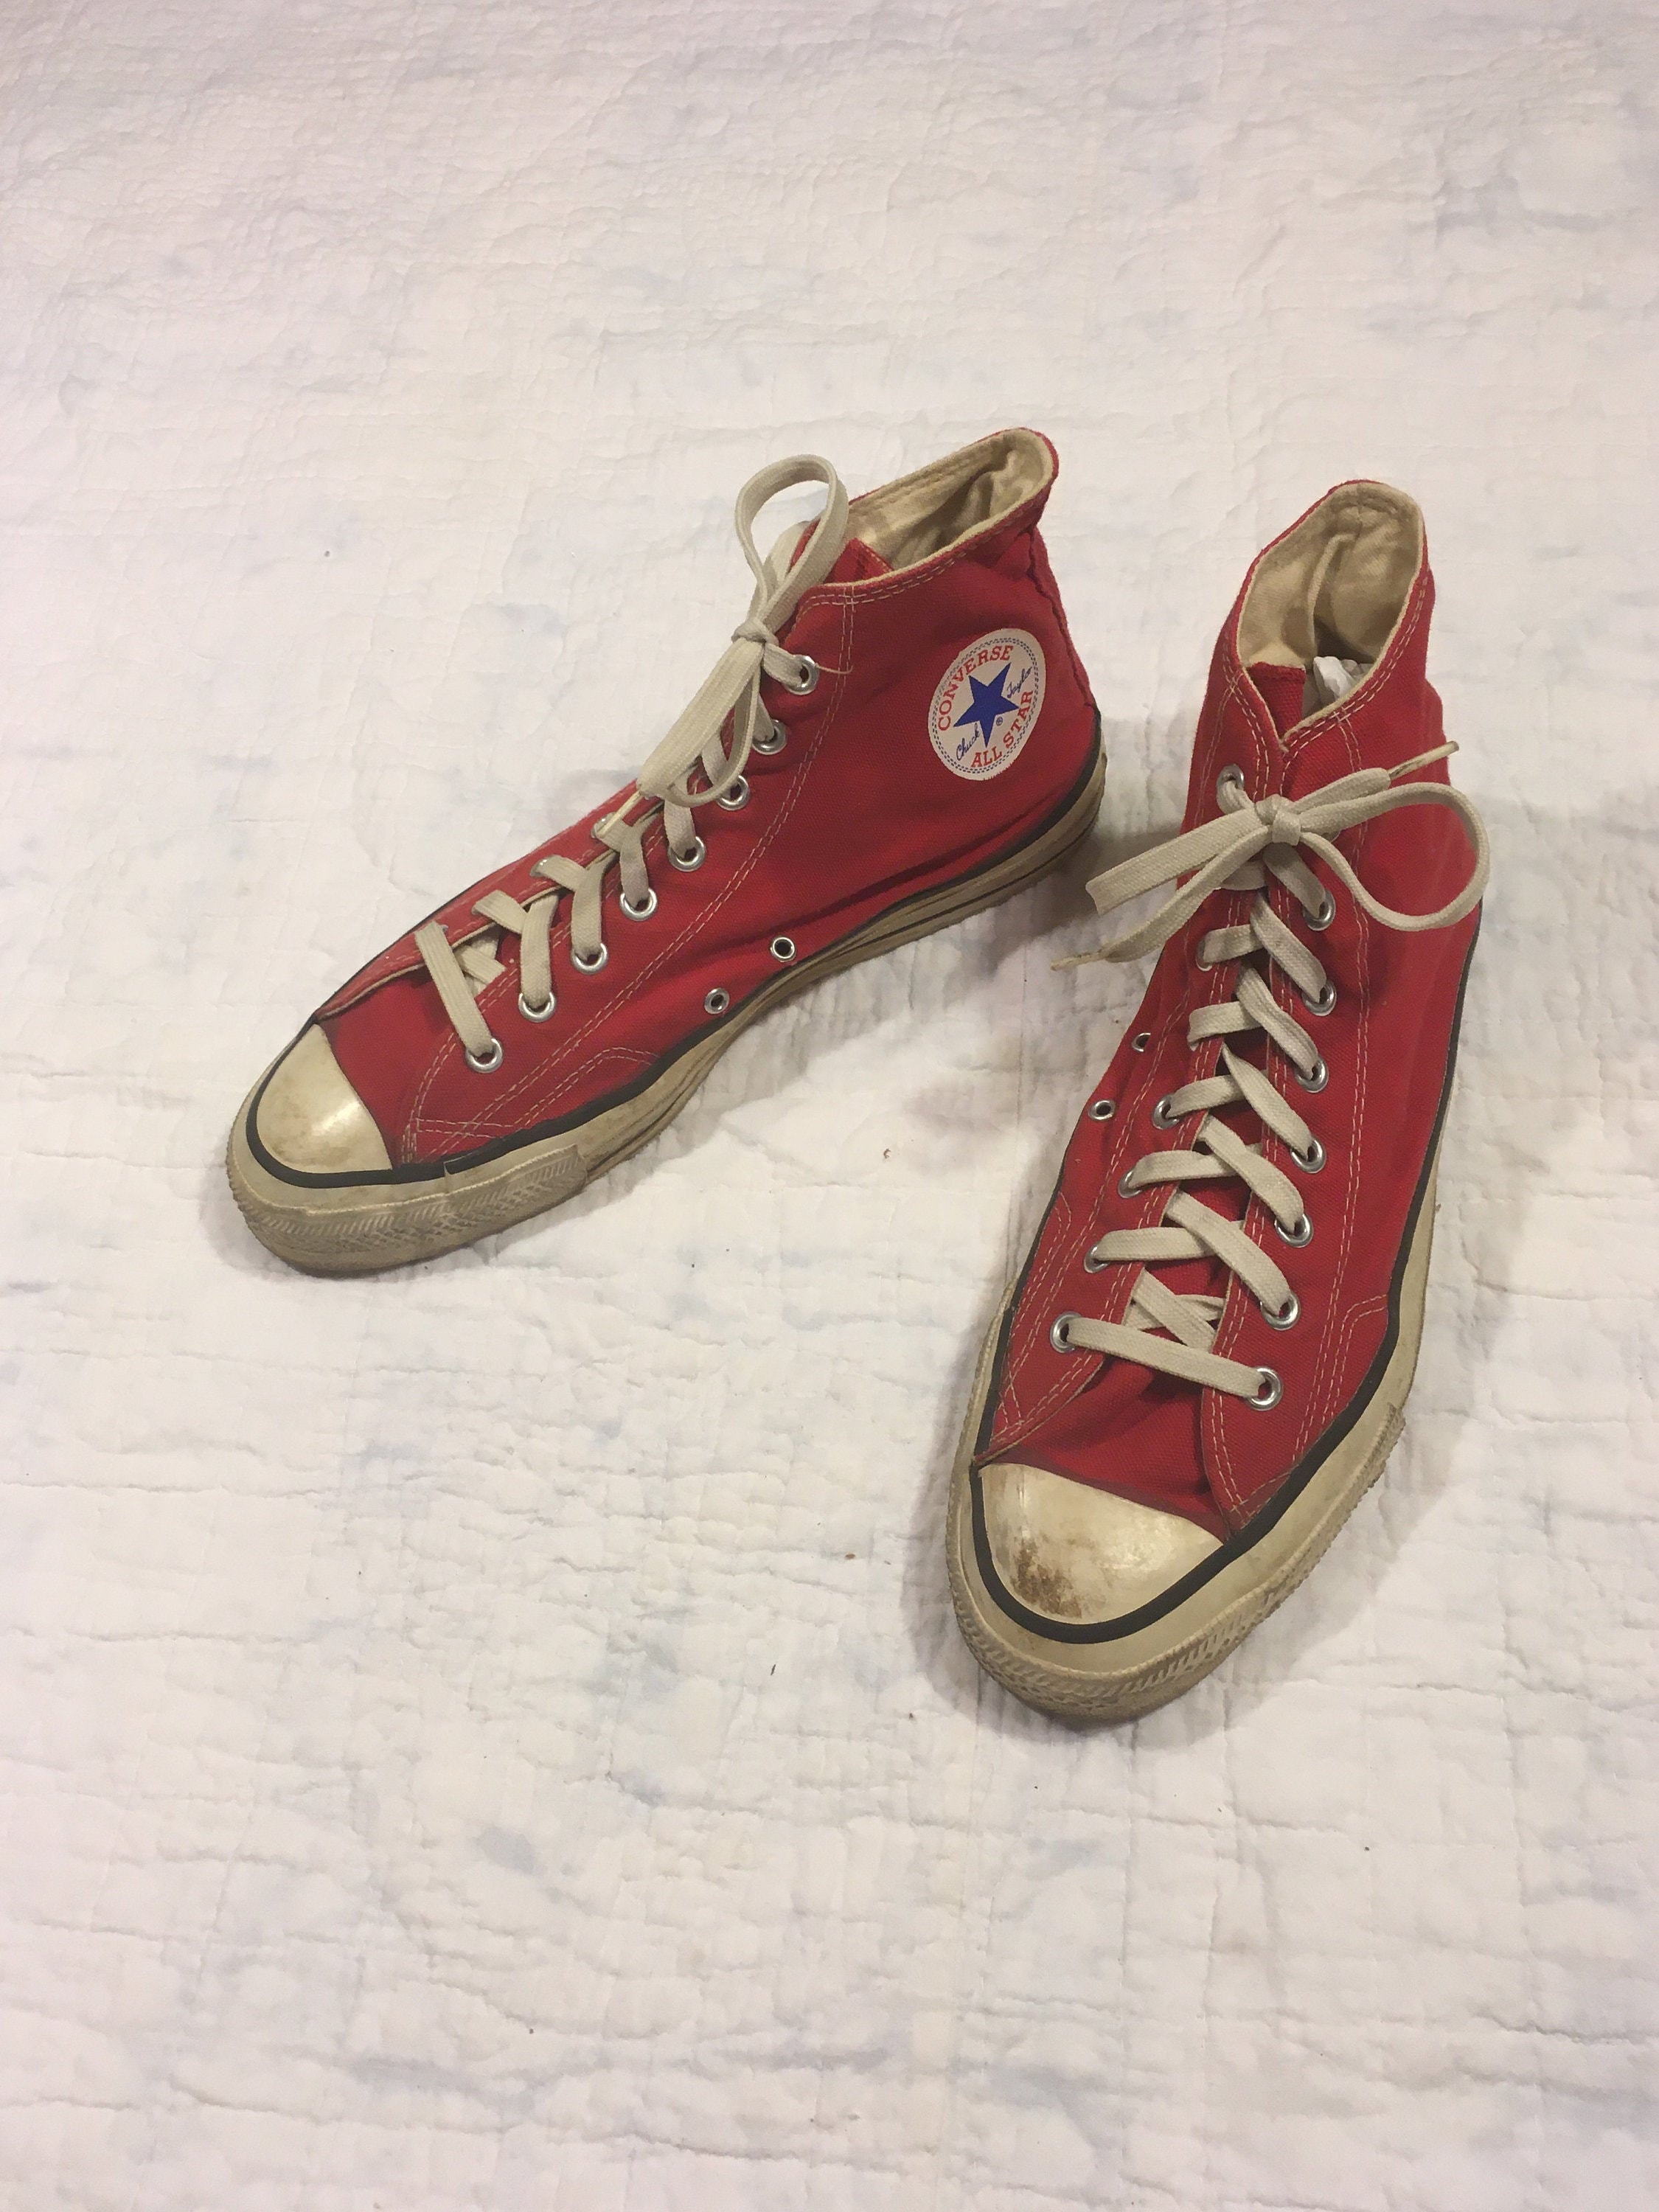 Vintage Converse All Star Taylor Extra Stitch Hi Top Red - Etsy